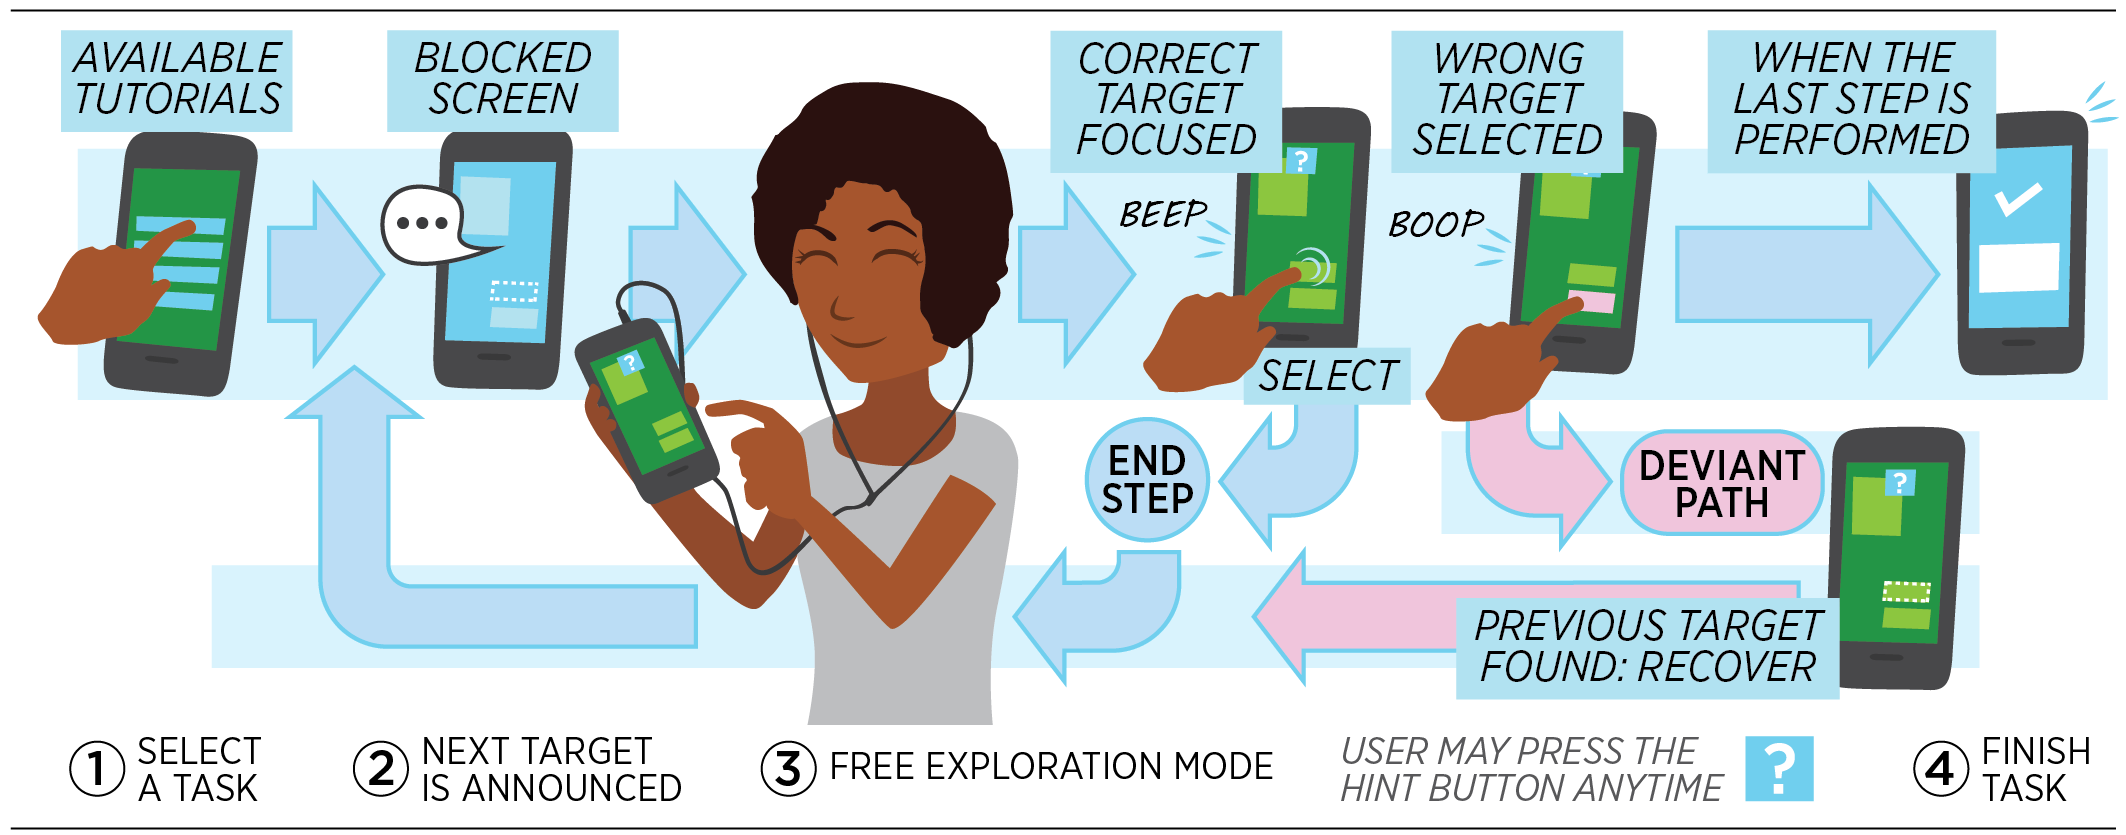 a scenario where a blind user is navigating her smartphonr while receiving audio instructions on how to perform a task